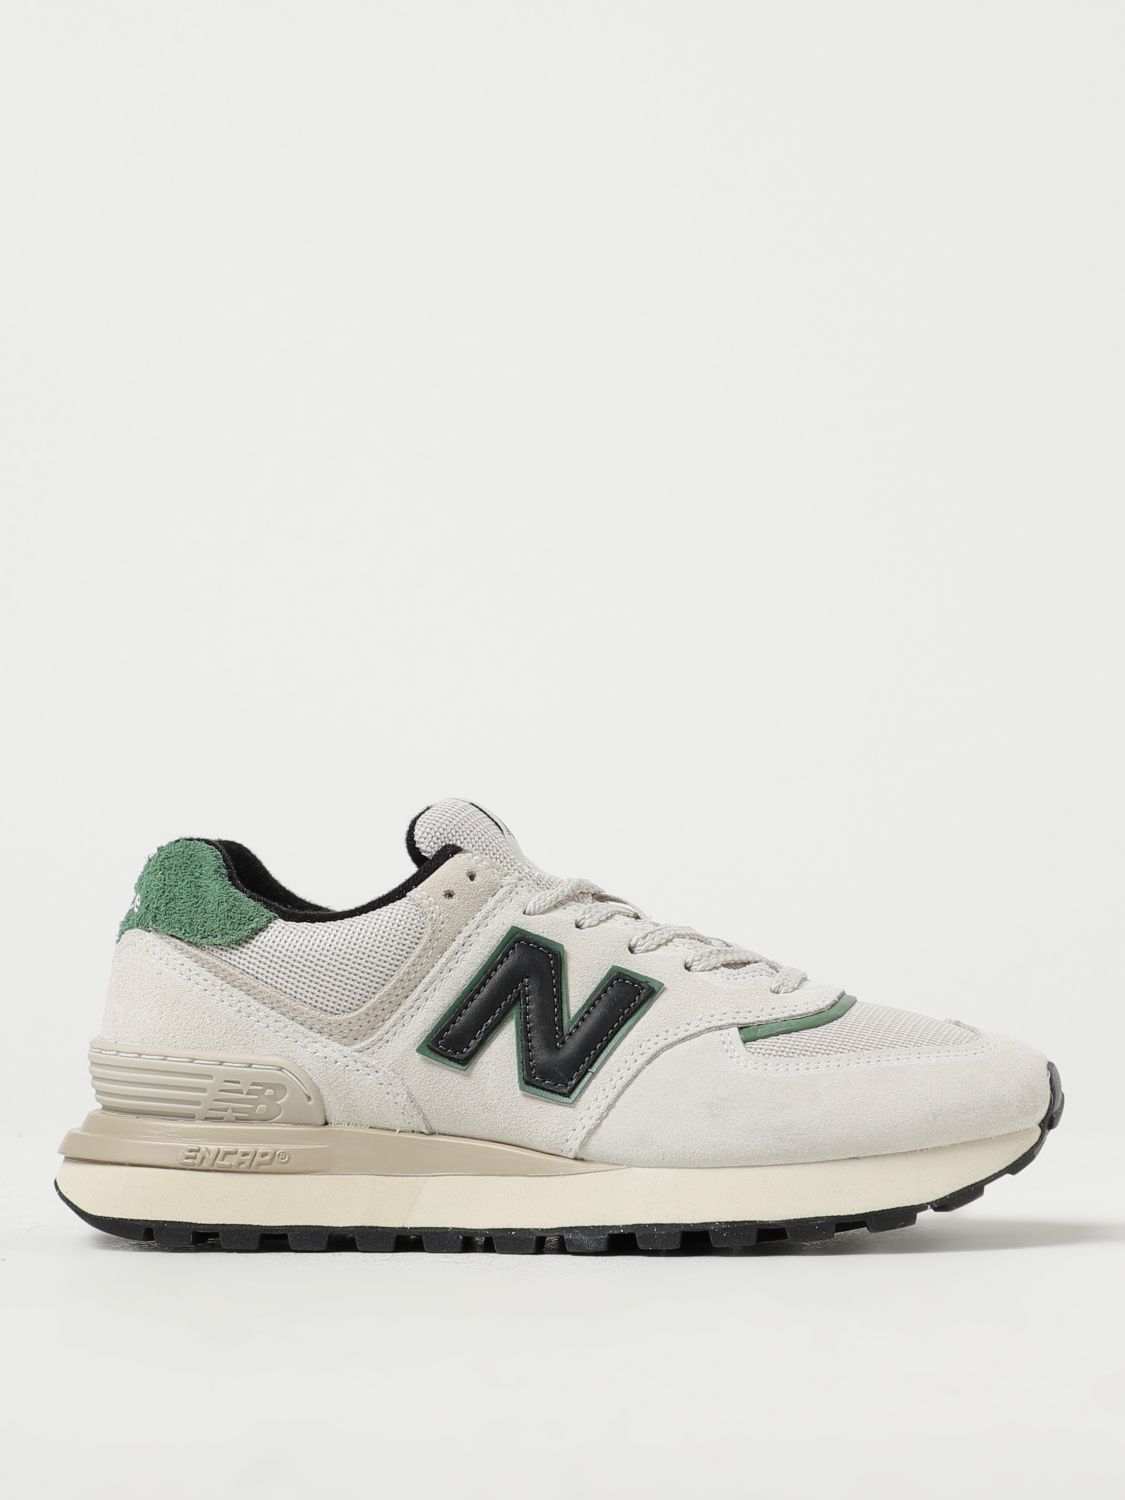 New Balance 515 | Mens Lifestyle Sneakers | Rogan's Shoes